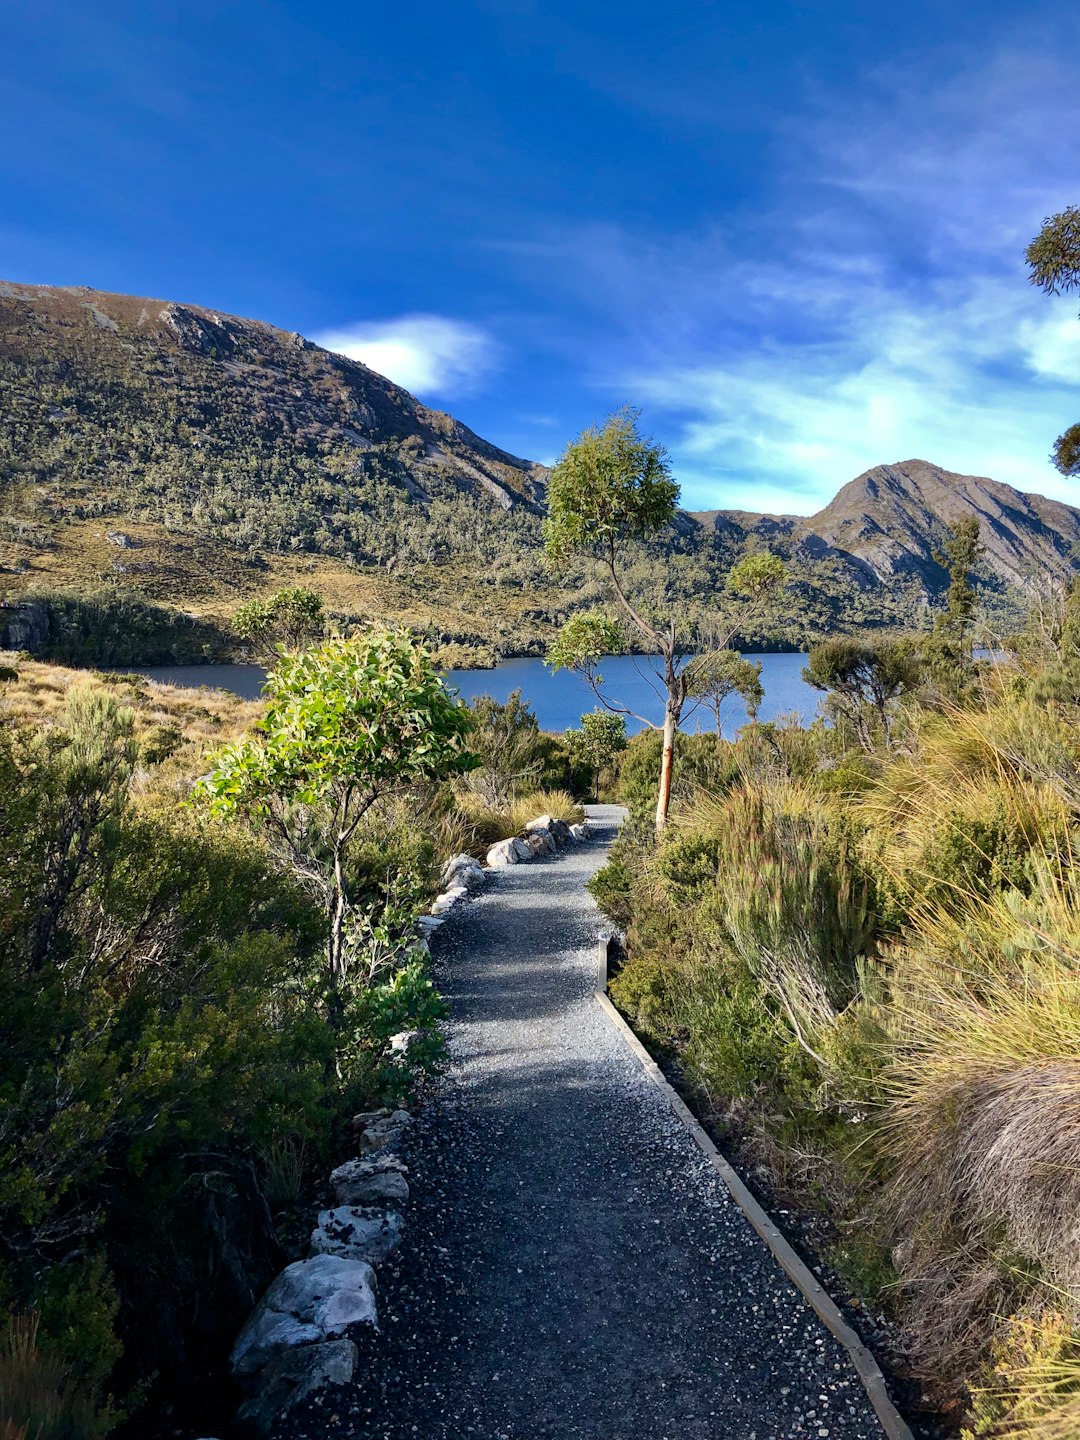 Travel Tips and Stories of Cradle Mountain-Lake St Clair National Park in Australia